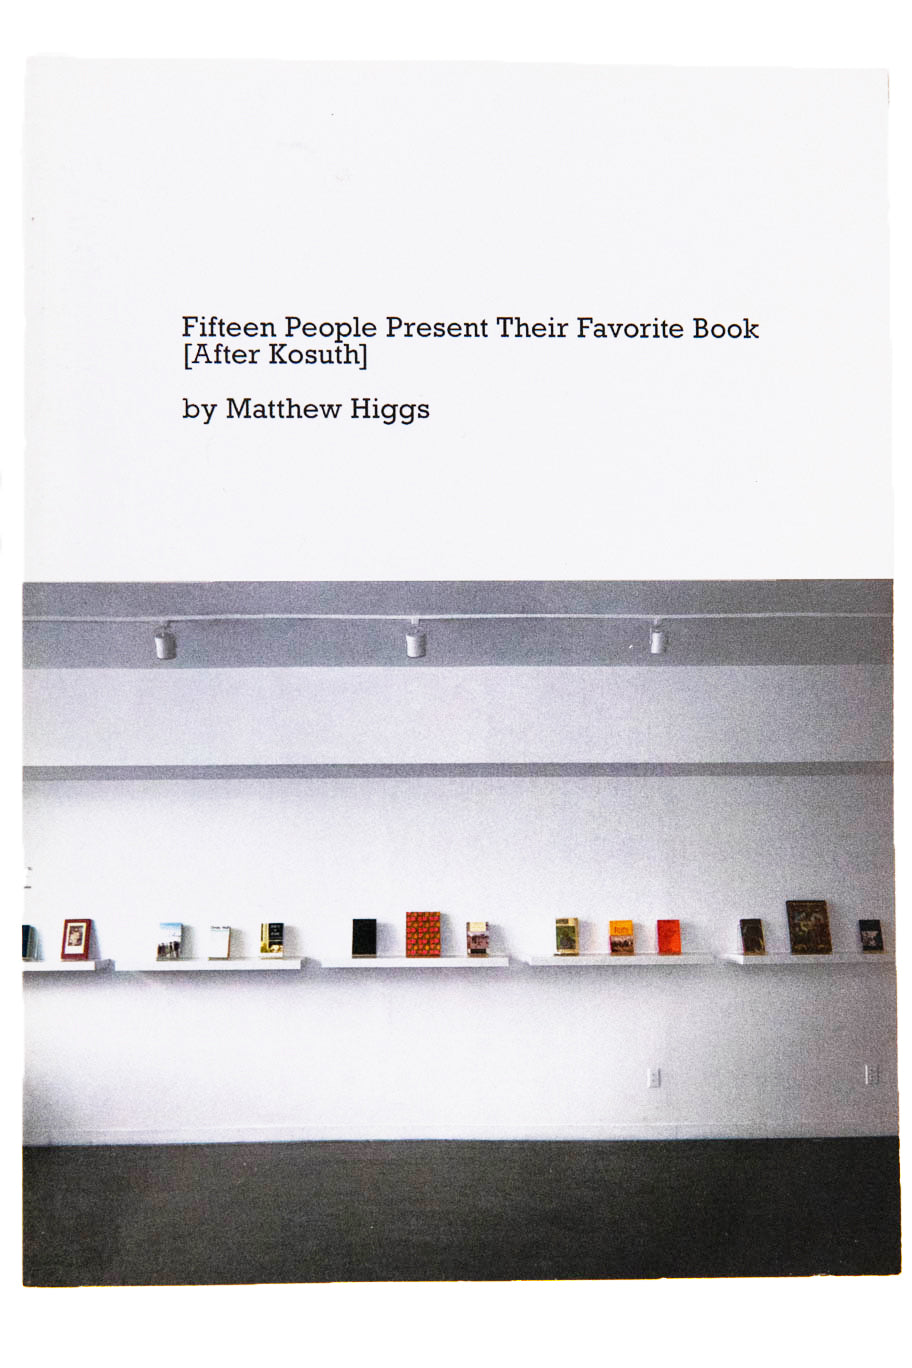 FIFTEEN PEOPLE PRESENT THEIR FAVORITE BOOK (after Kosuth)